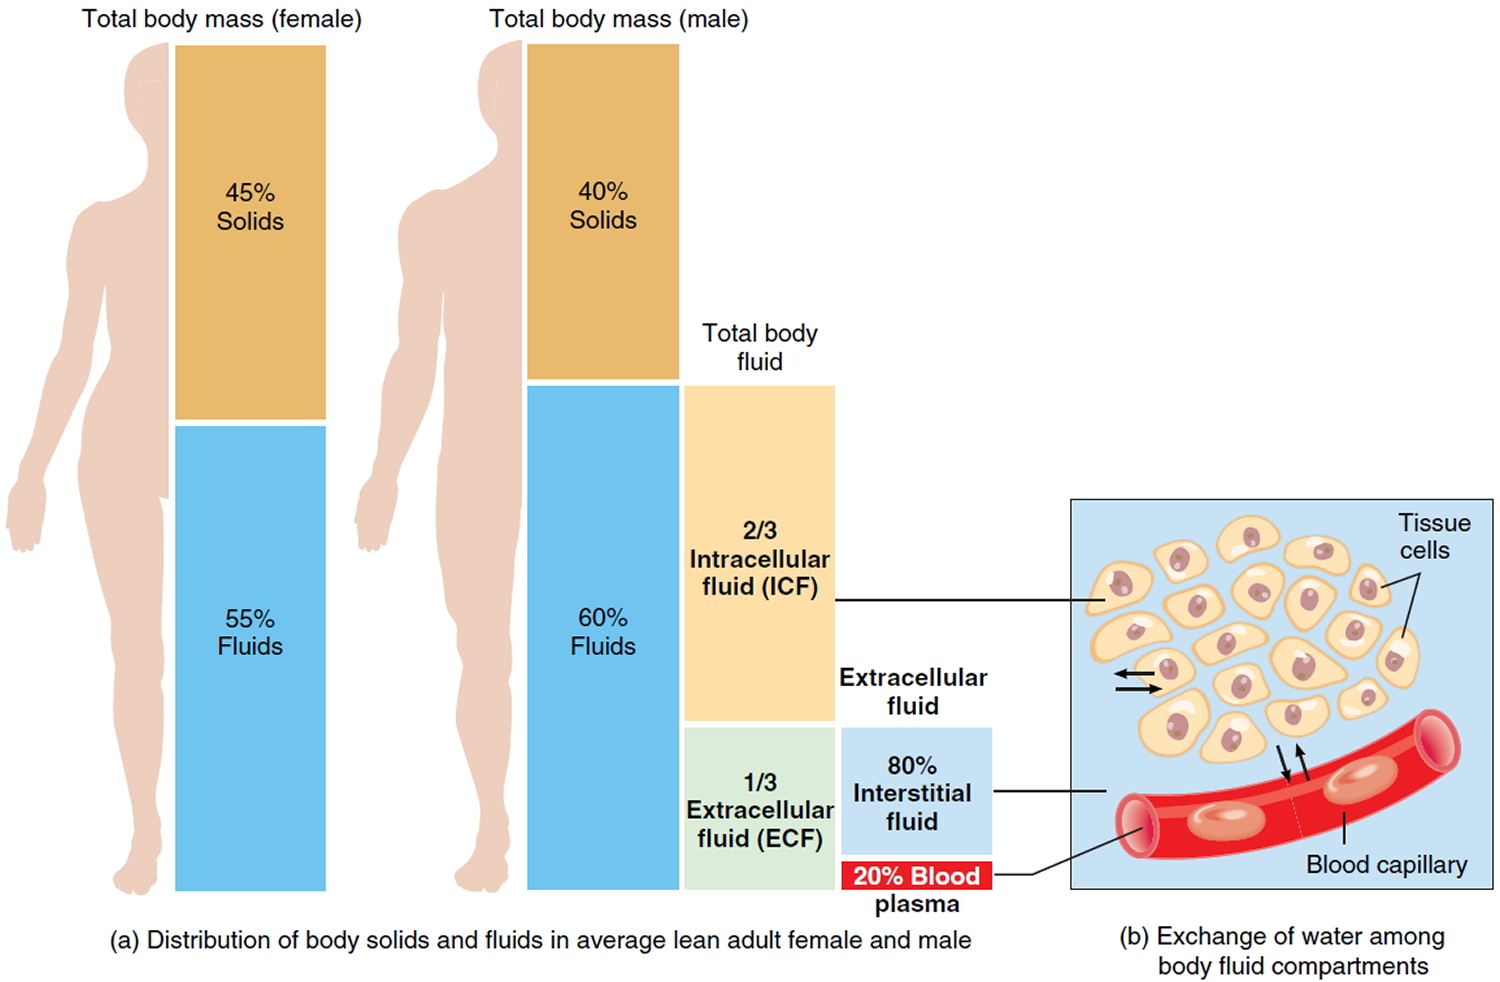 body fluid compartments and the percentages of each